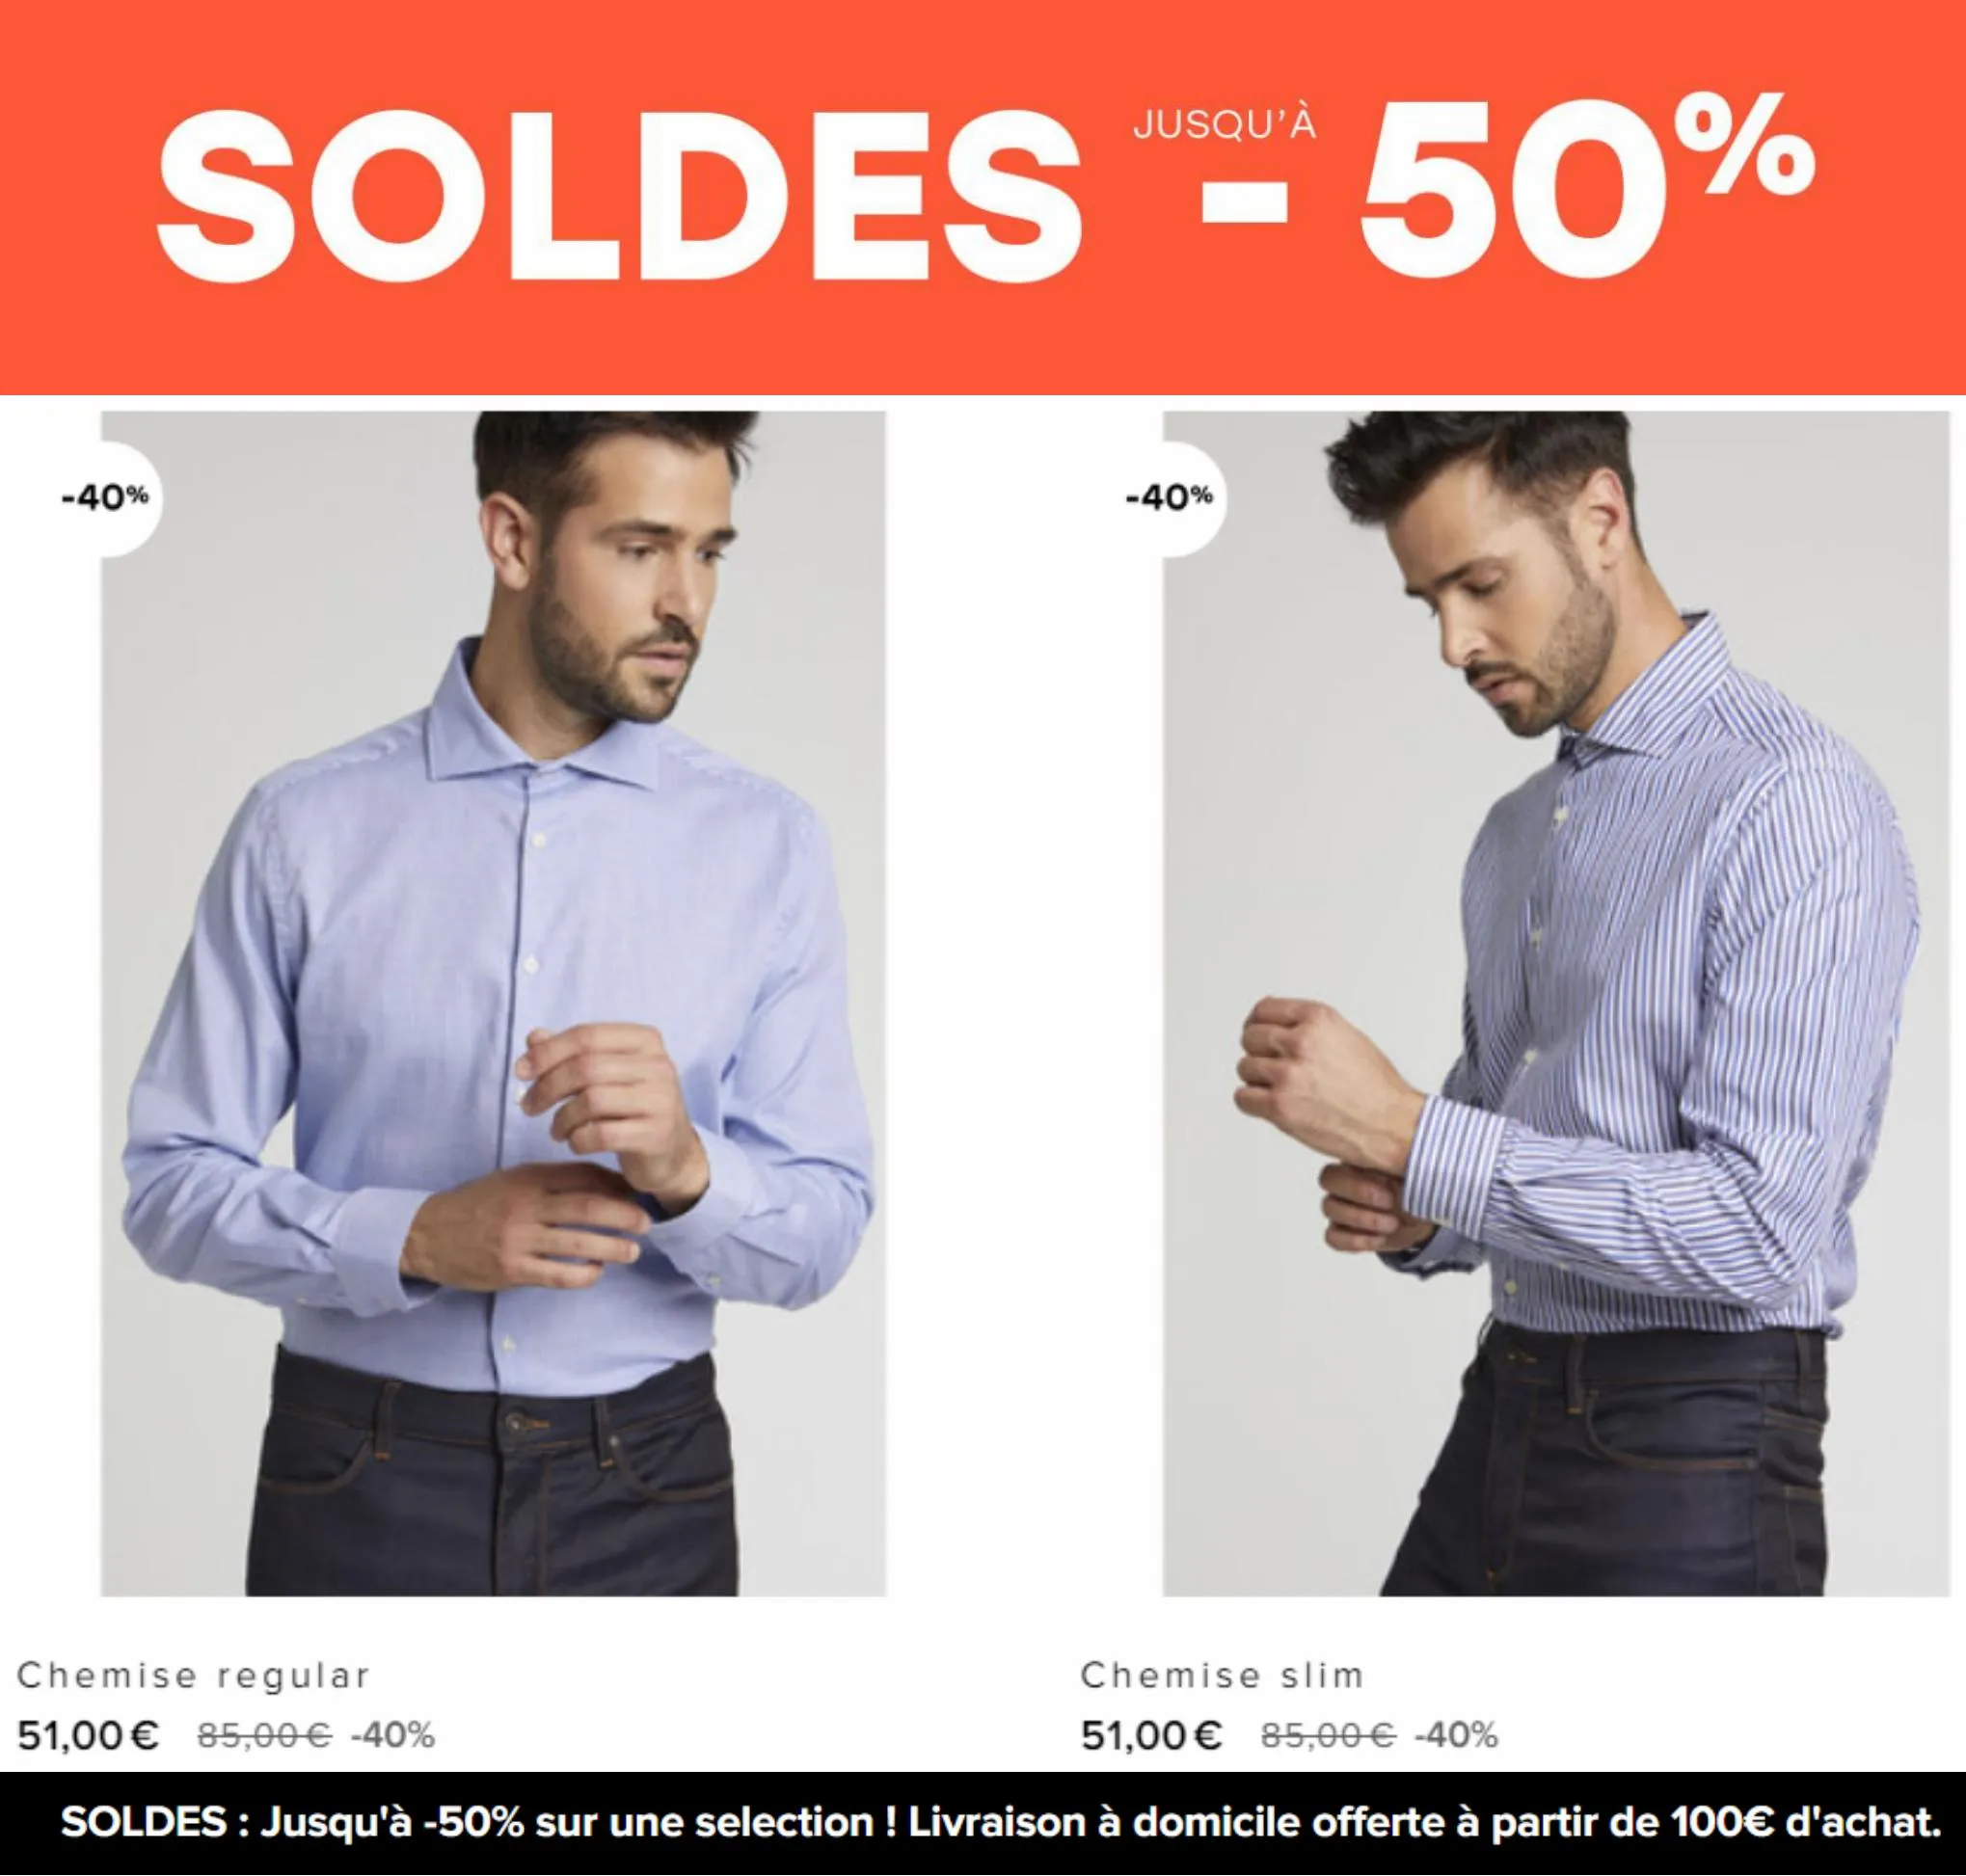 Catalogue Soldes -50% Homme, page 00006